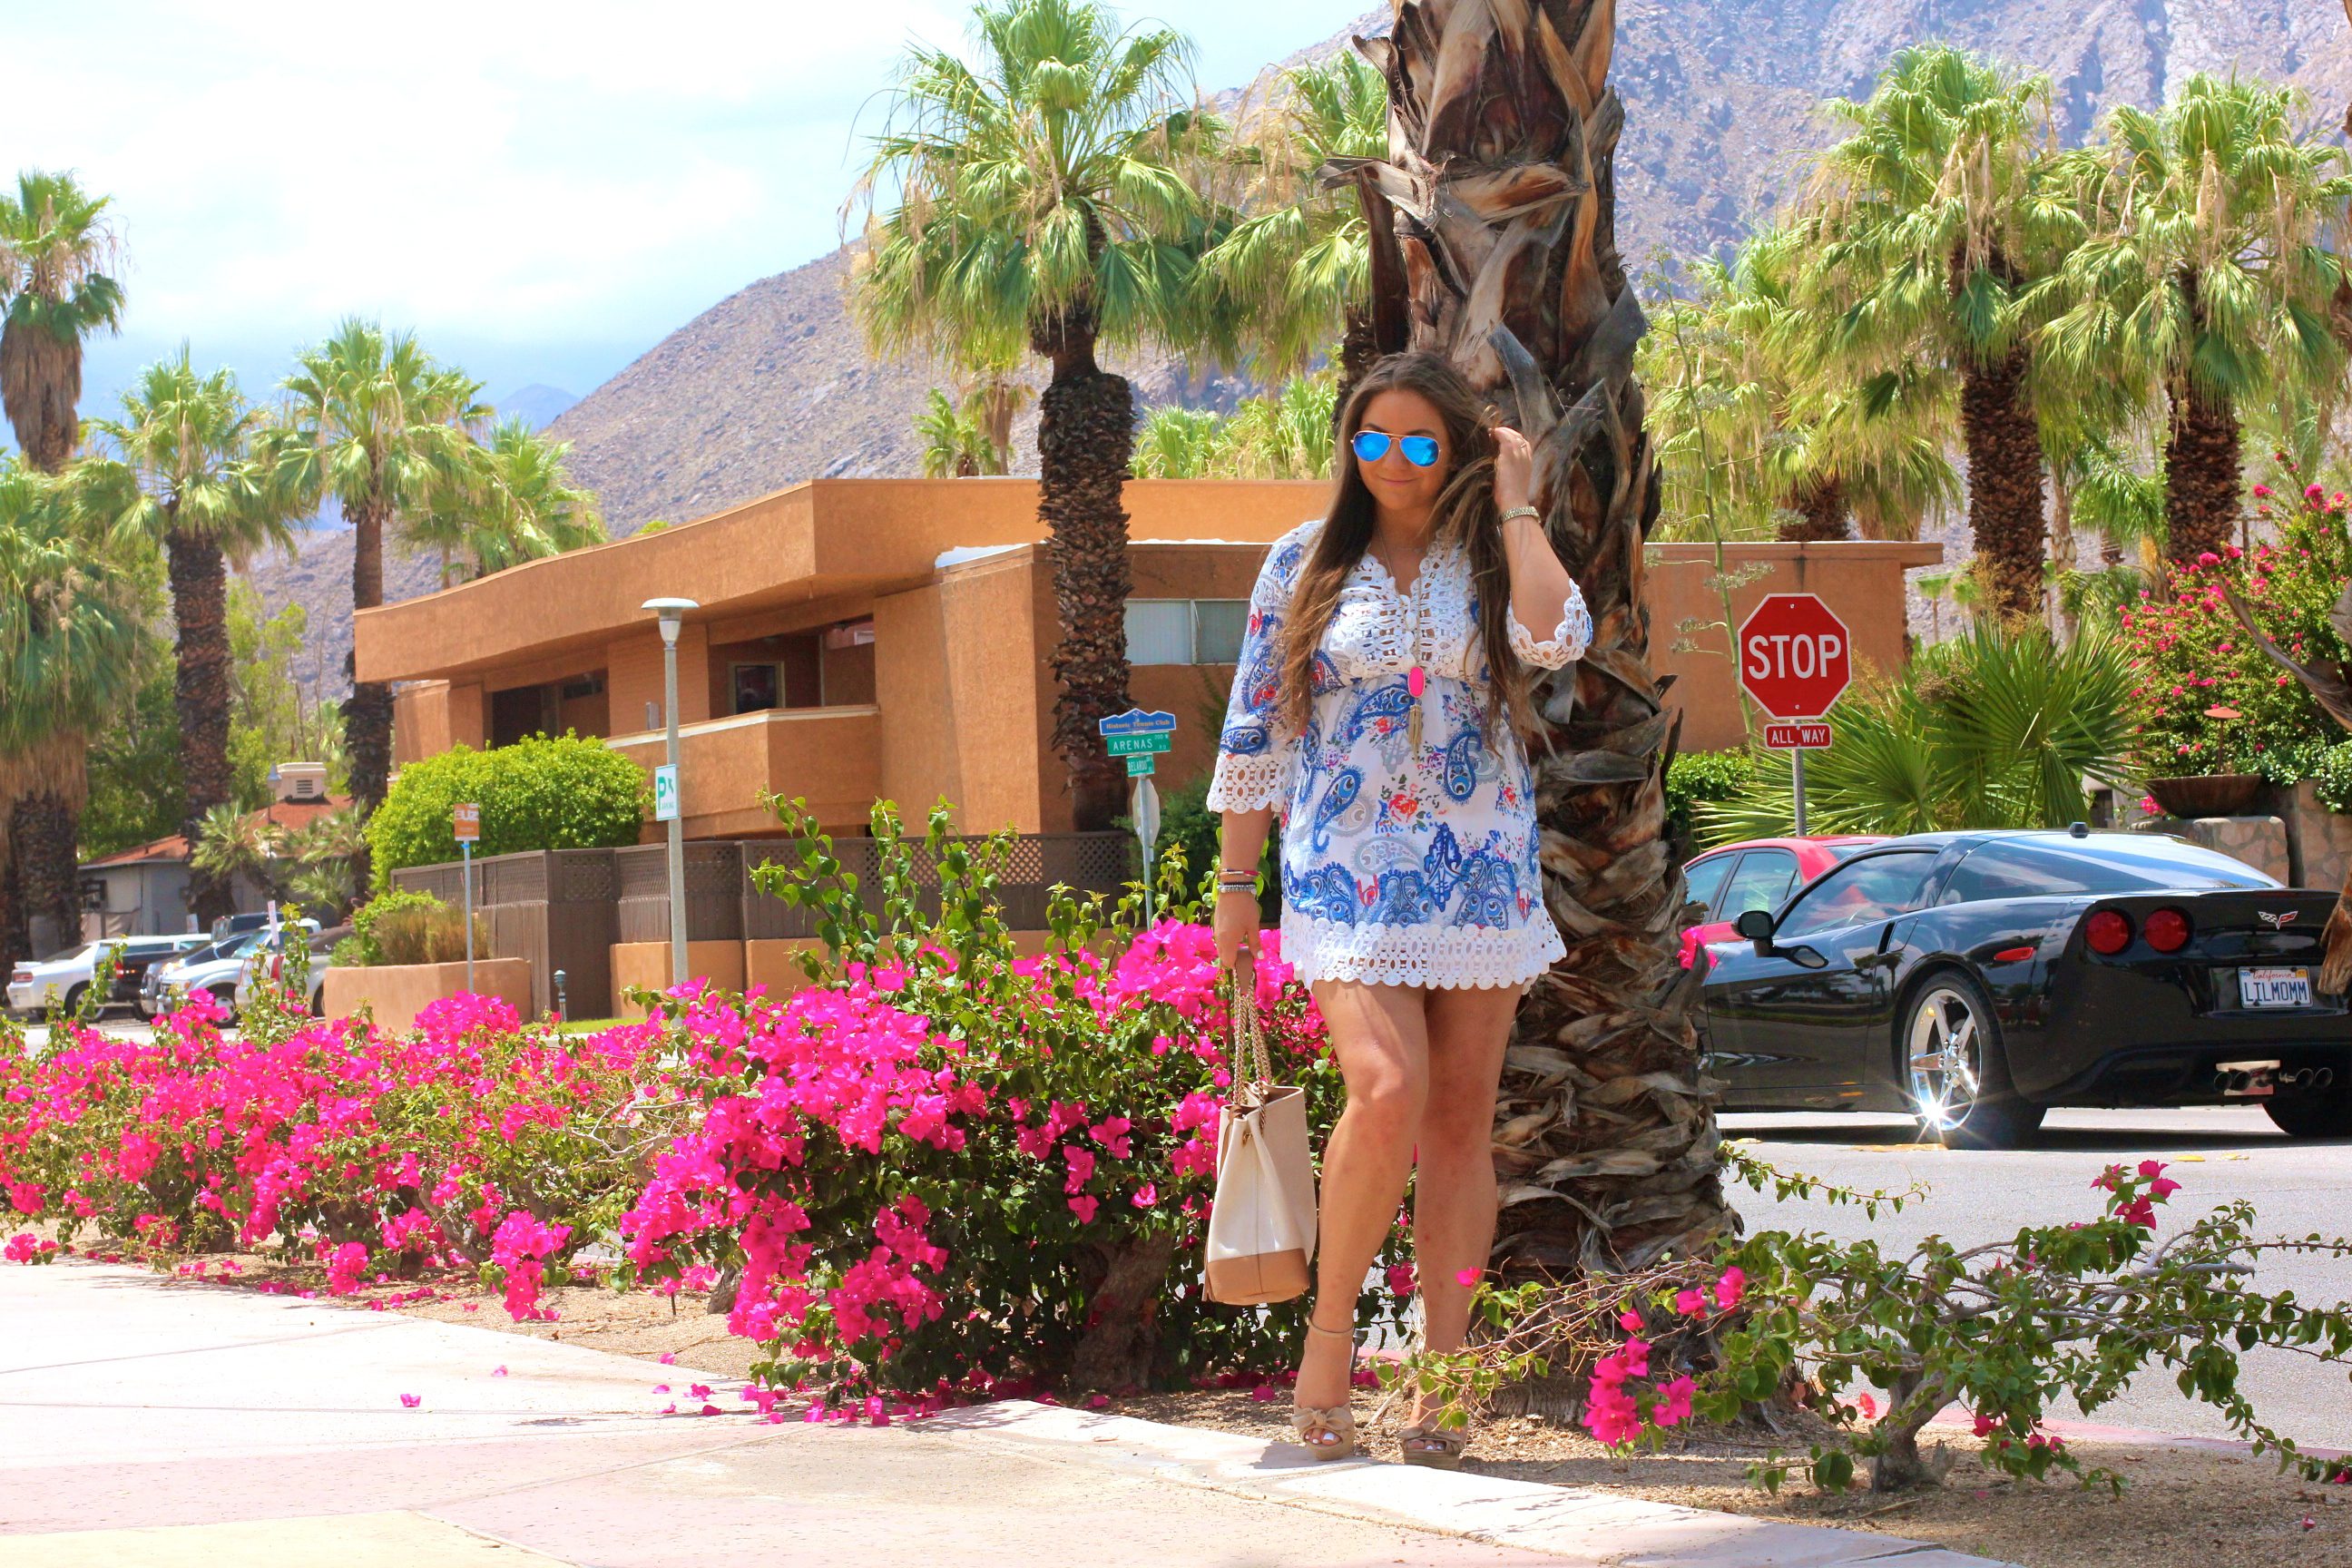 missyonmadison, melissa tierney, fashion blogger, palm springs, choies, paisley dress, gucci bag, gucci, gucci soho tote, espadrille wedges, nude espadrille wedges, ray bans, blue aviators, kendra scott necklace, la blogger blogger, tbt, style blogger,